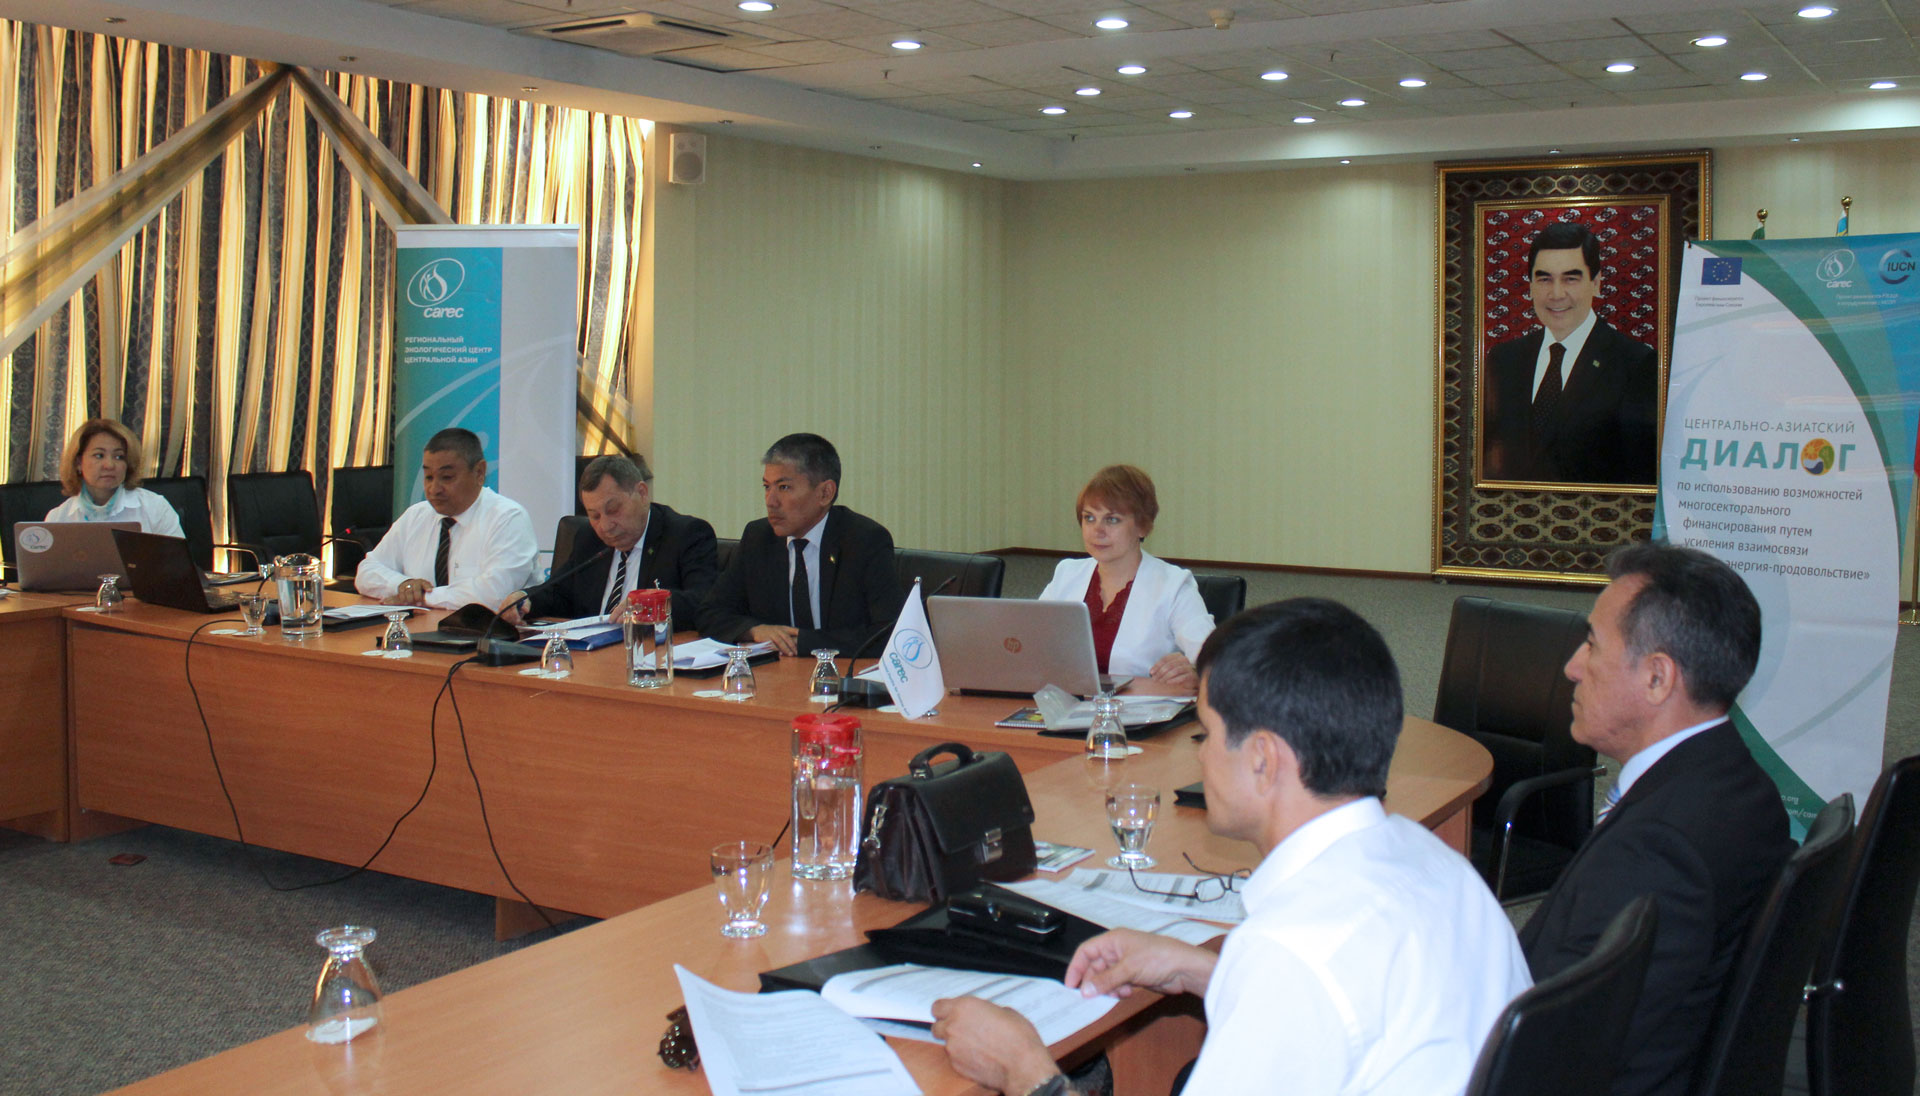  Ten project proposals based on water, energy and food security approach discussed in Turkmenistan